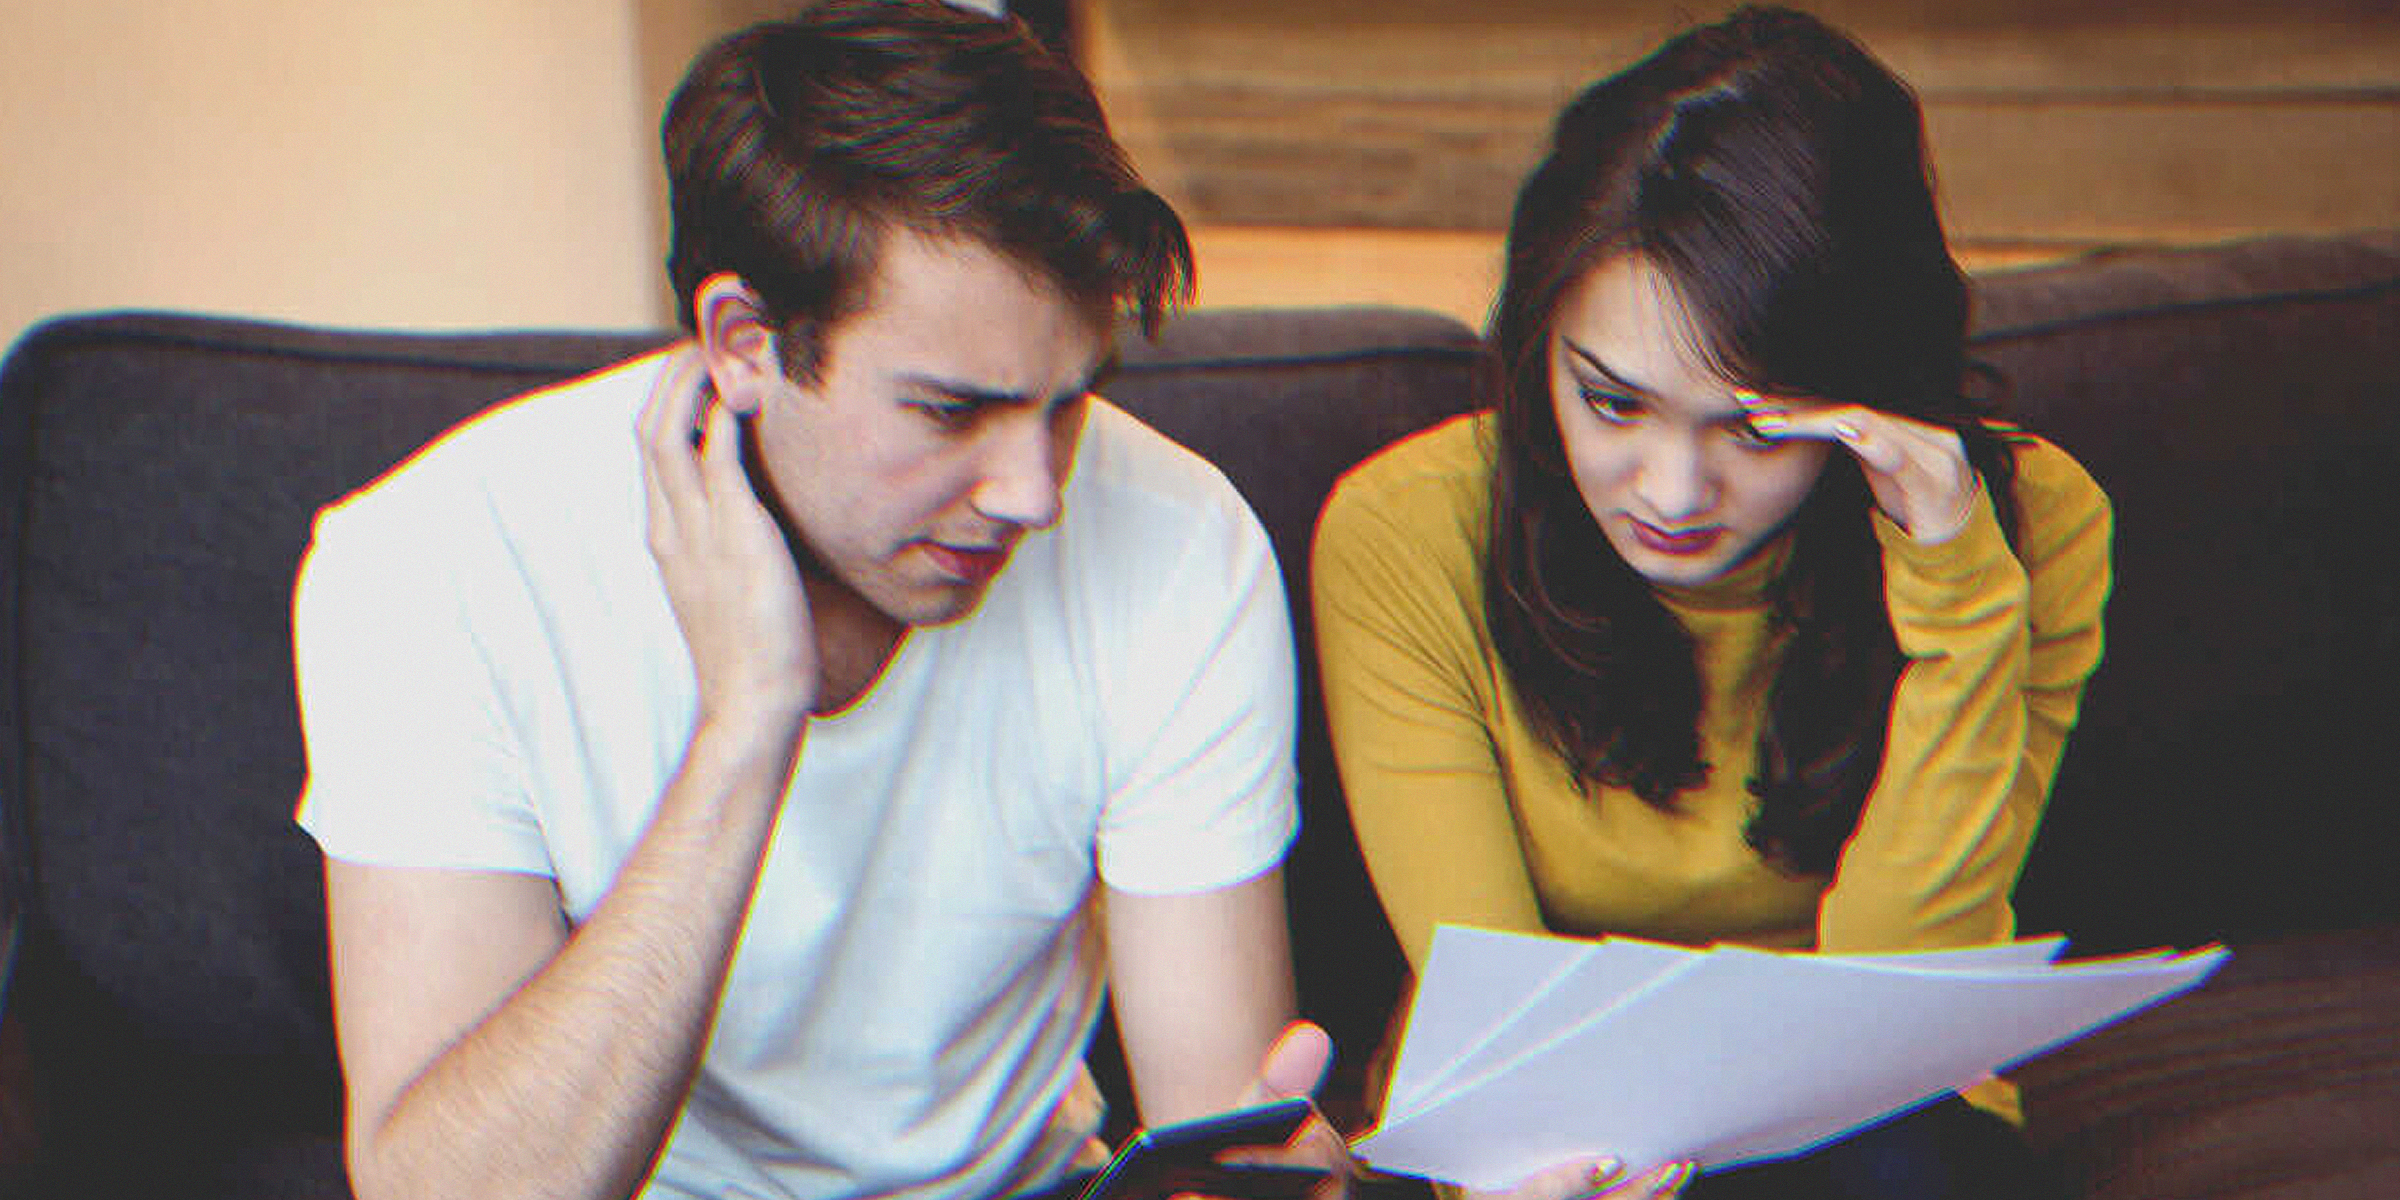 A photo of a couple looking anxiously at a document | Source: Freepik